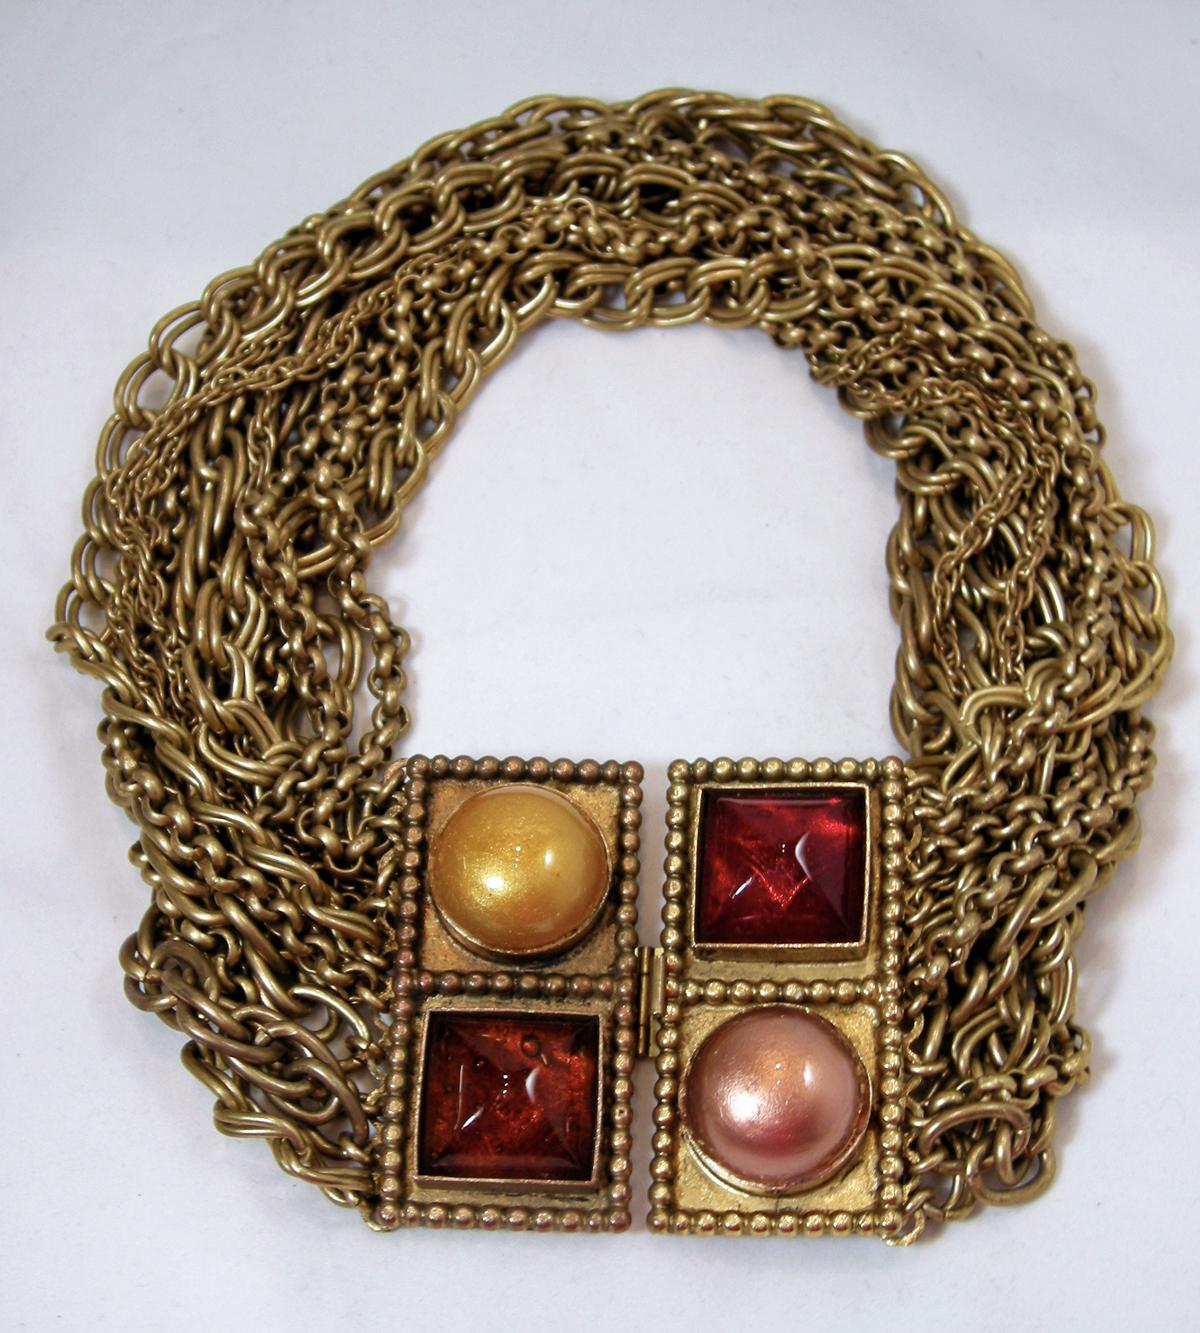 This is a gorgeous Isabel Canovas necklace that incorporates 12 different chains that lead to two squares on each end creating an oblong ribbed design. On one side is Gripoix topaz color glass along with a yellow dome.  The other side has red